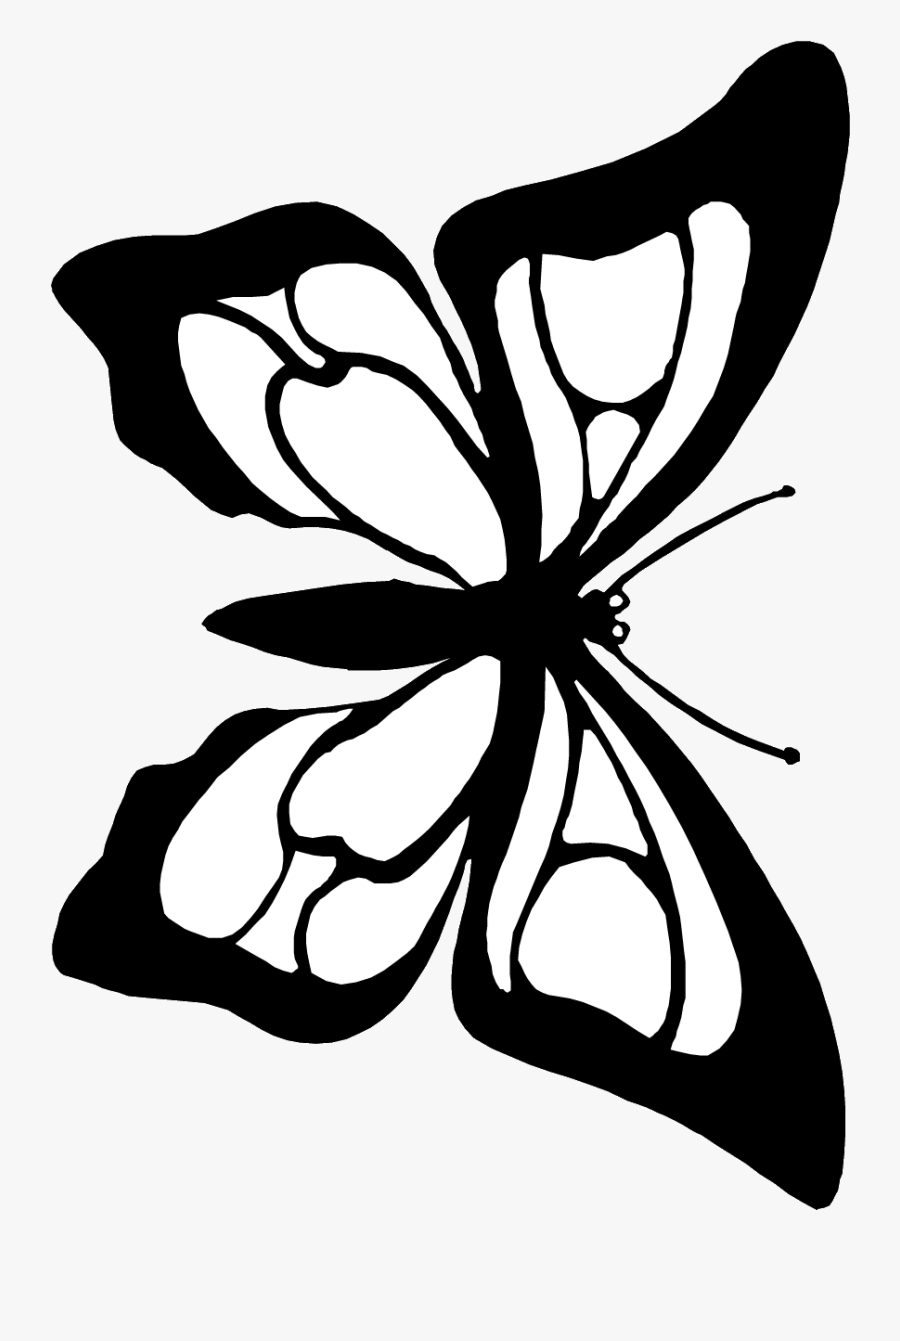 Download Butterfly Cutout Coloring Page - Butterfly Black White To ...